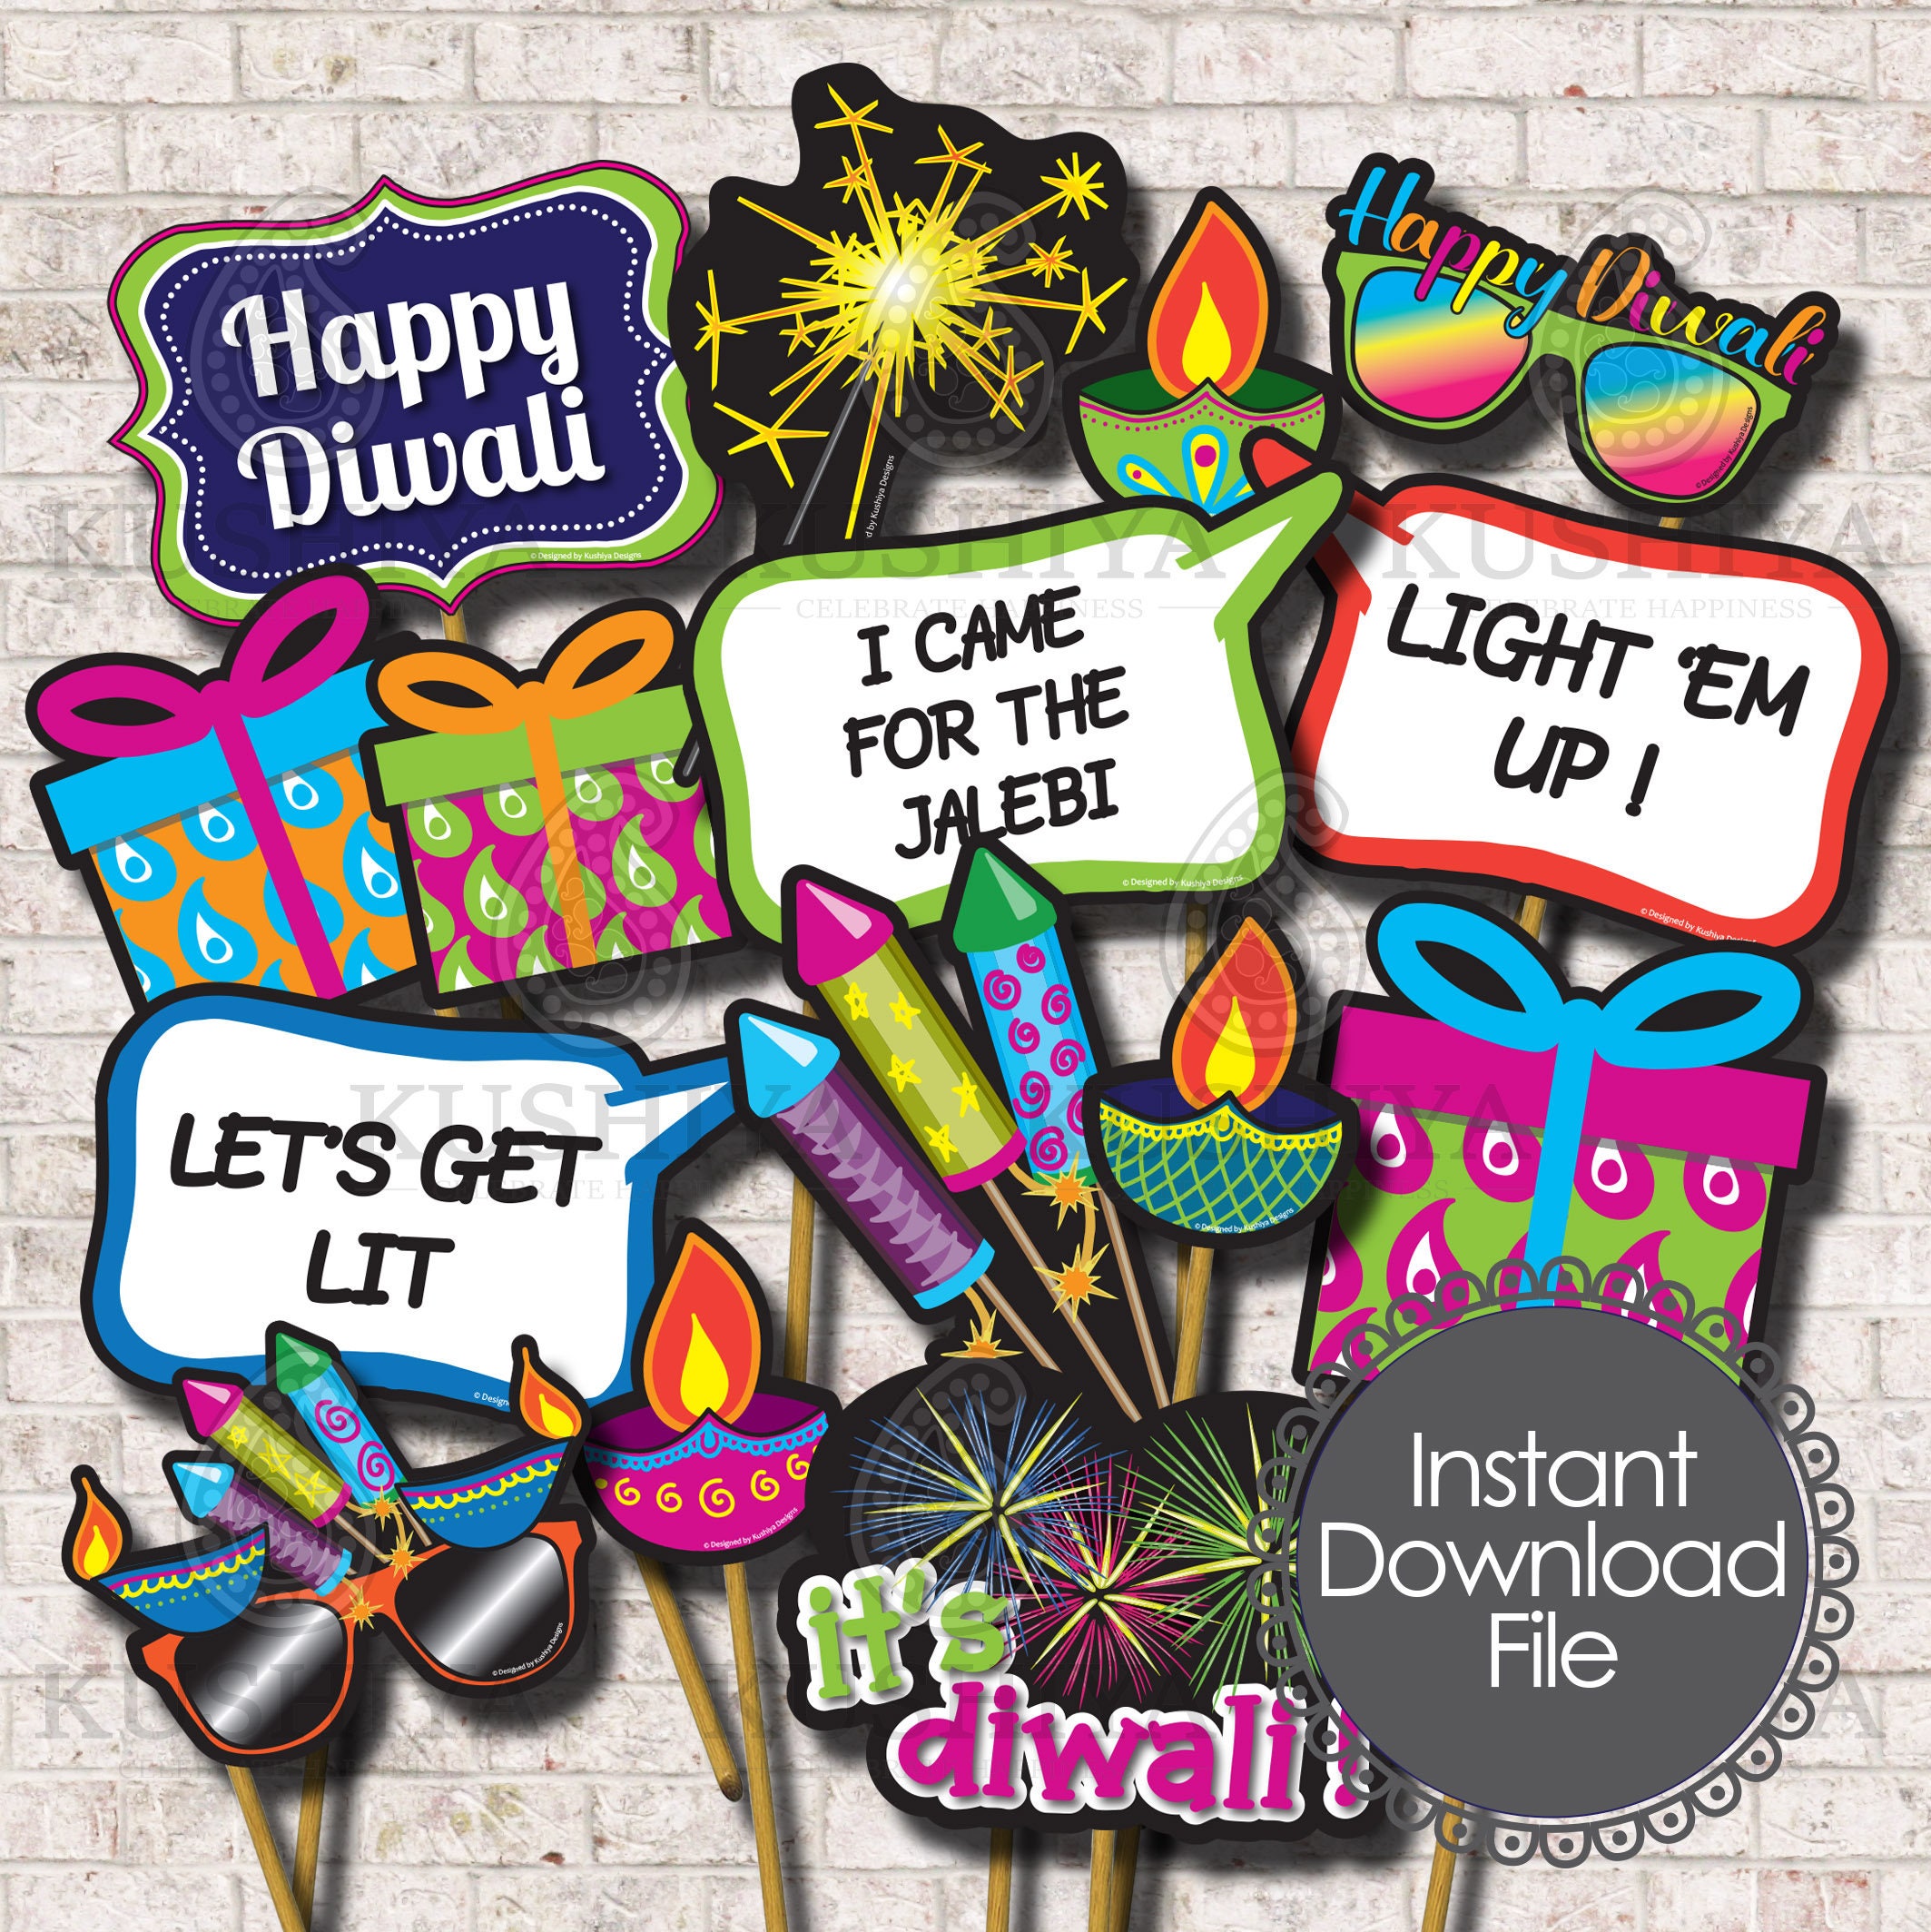 diwali-party-photo-booth-props-set-of-14-diwali